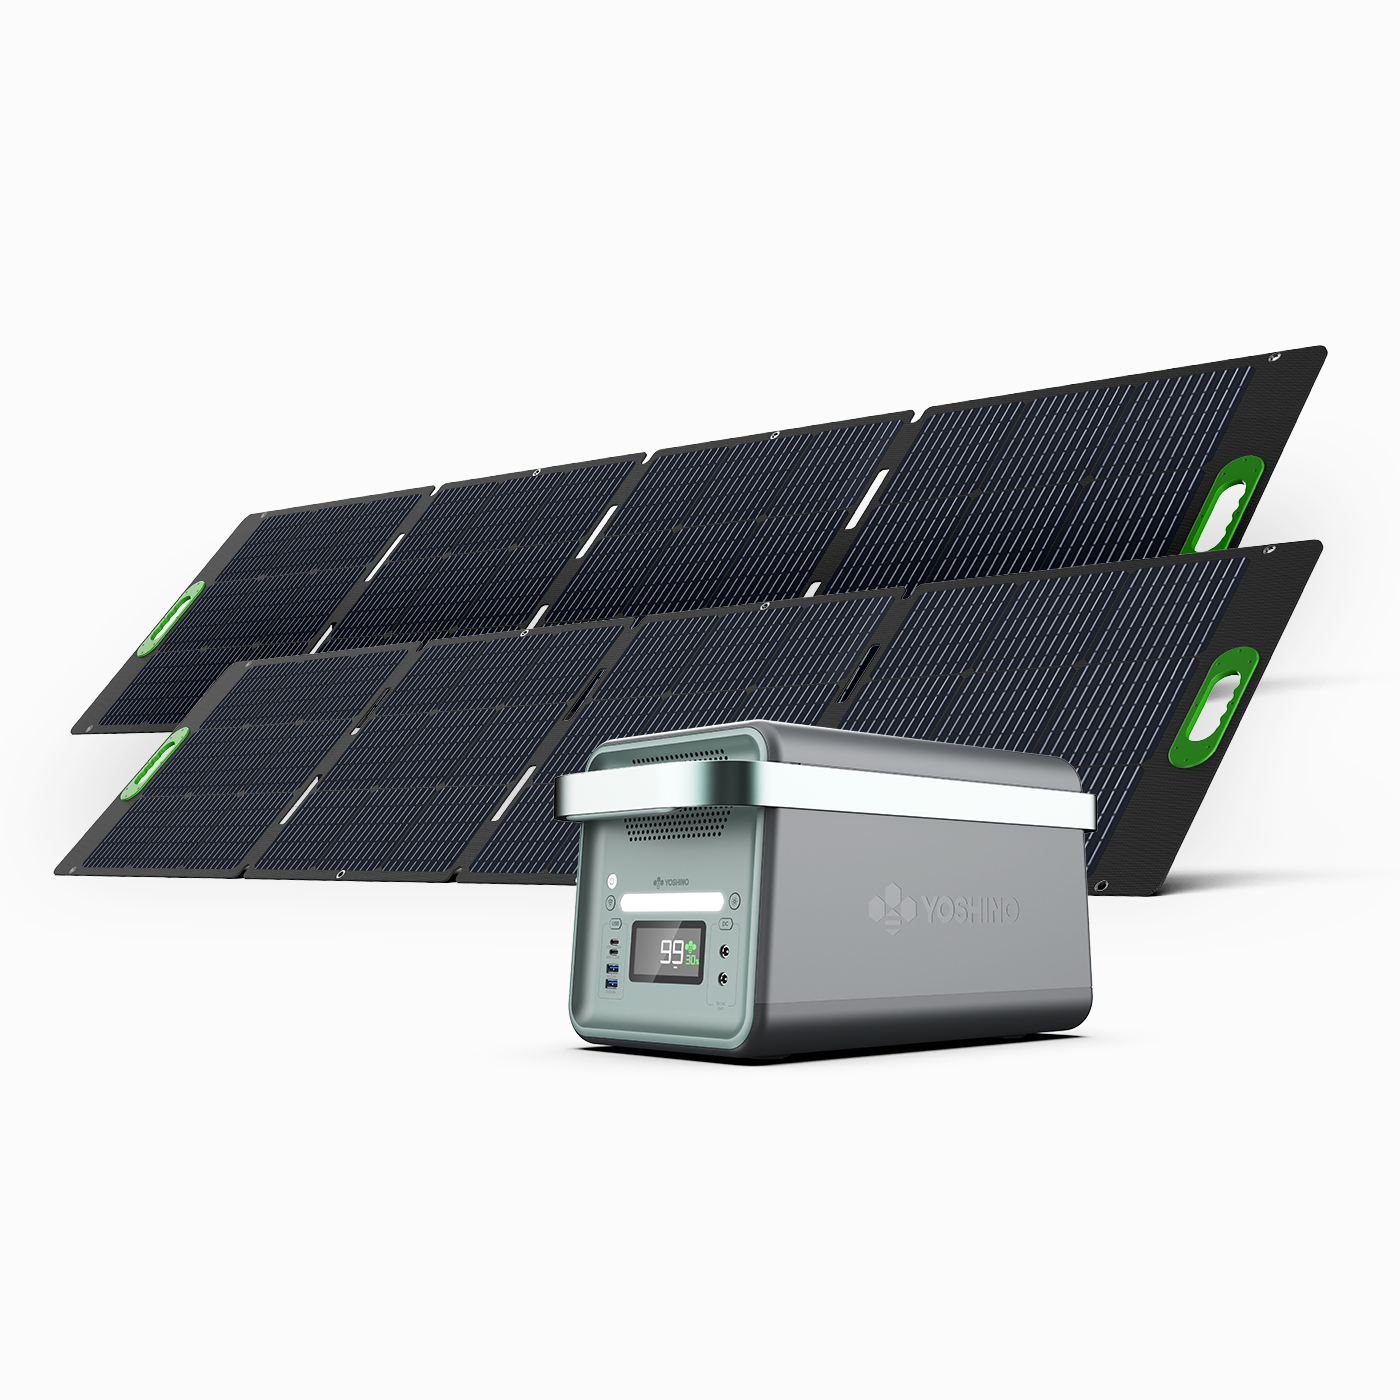 Yoshino Power K20SP22 Solid State Portable Solar Generator - Angled View